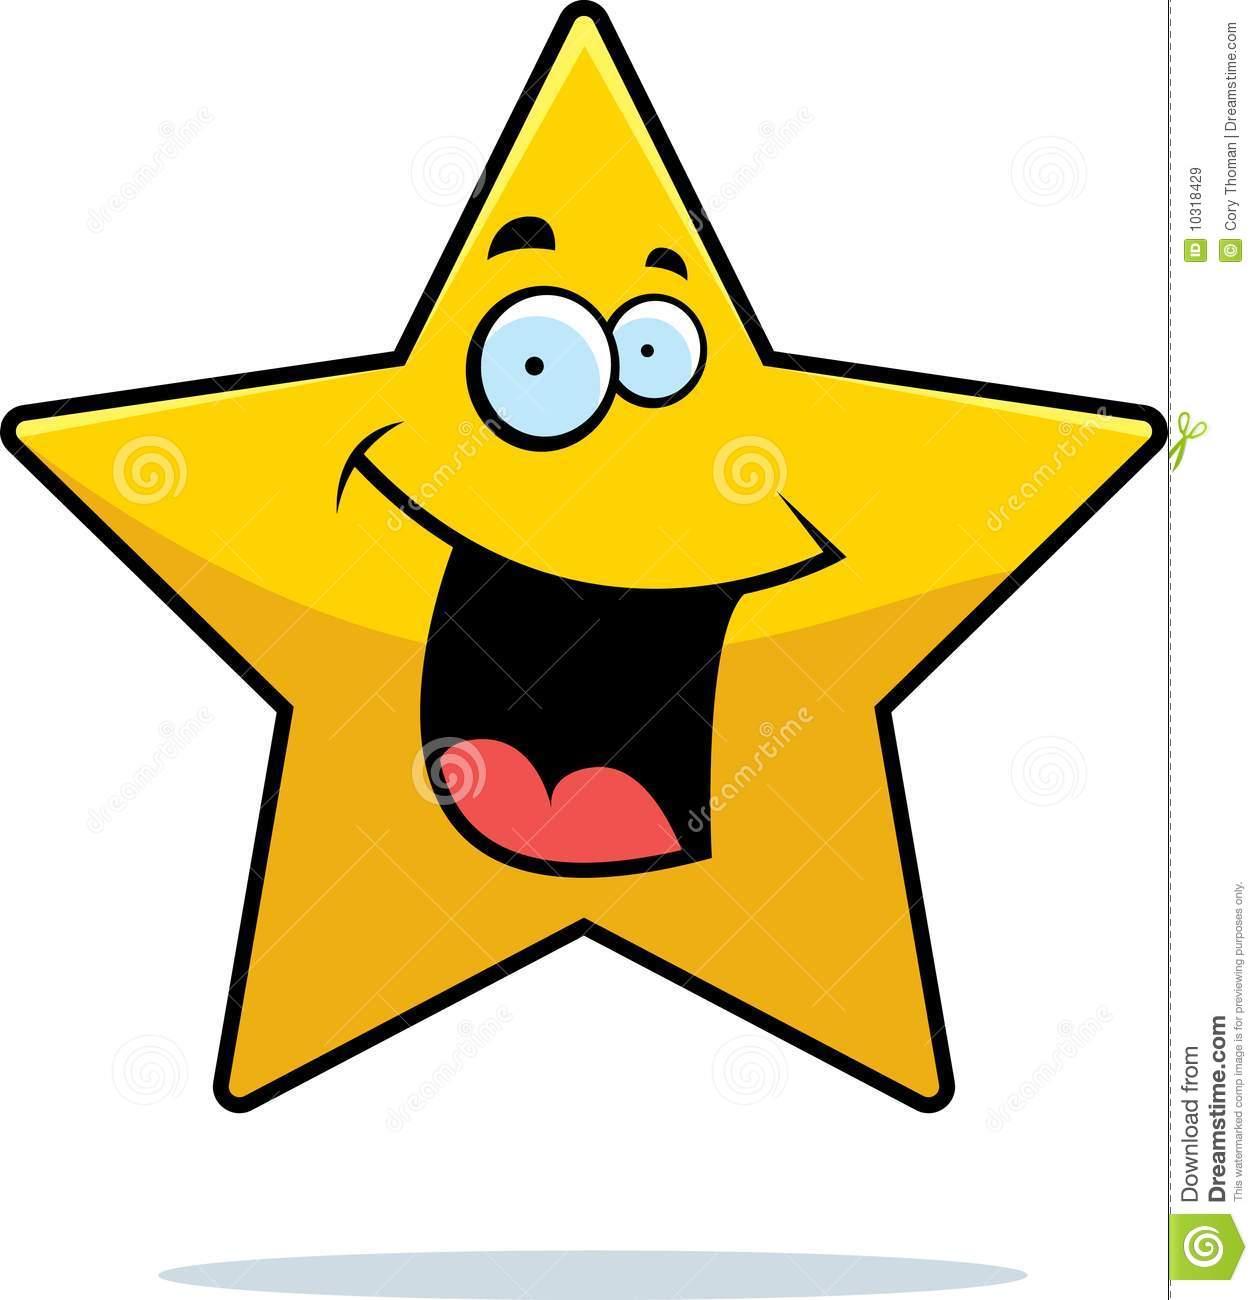 Star shapes clipart.